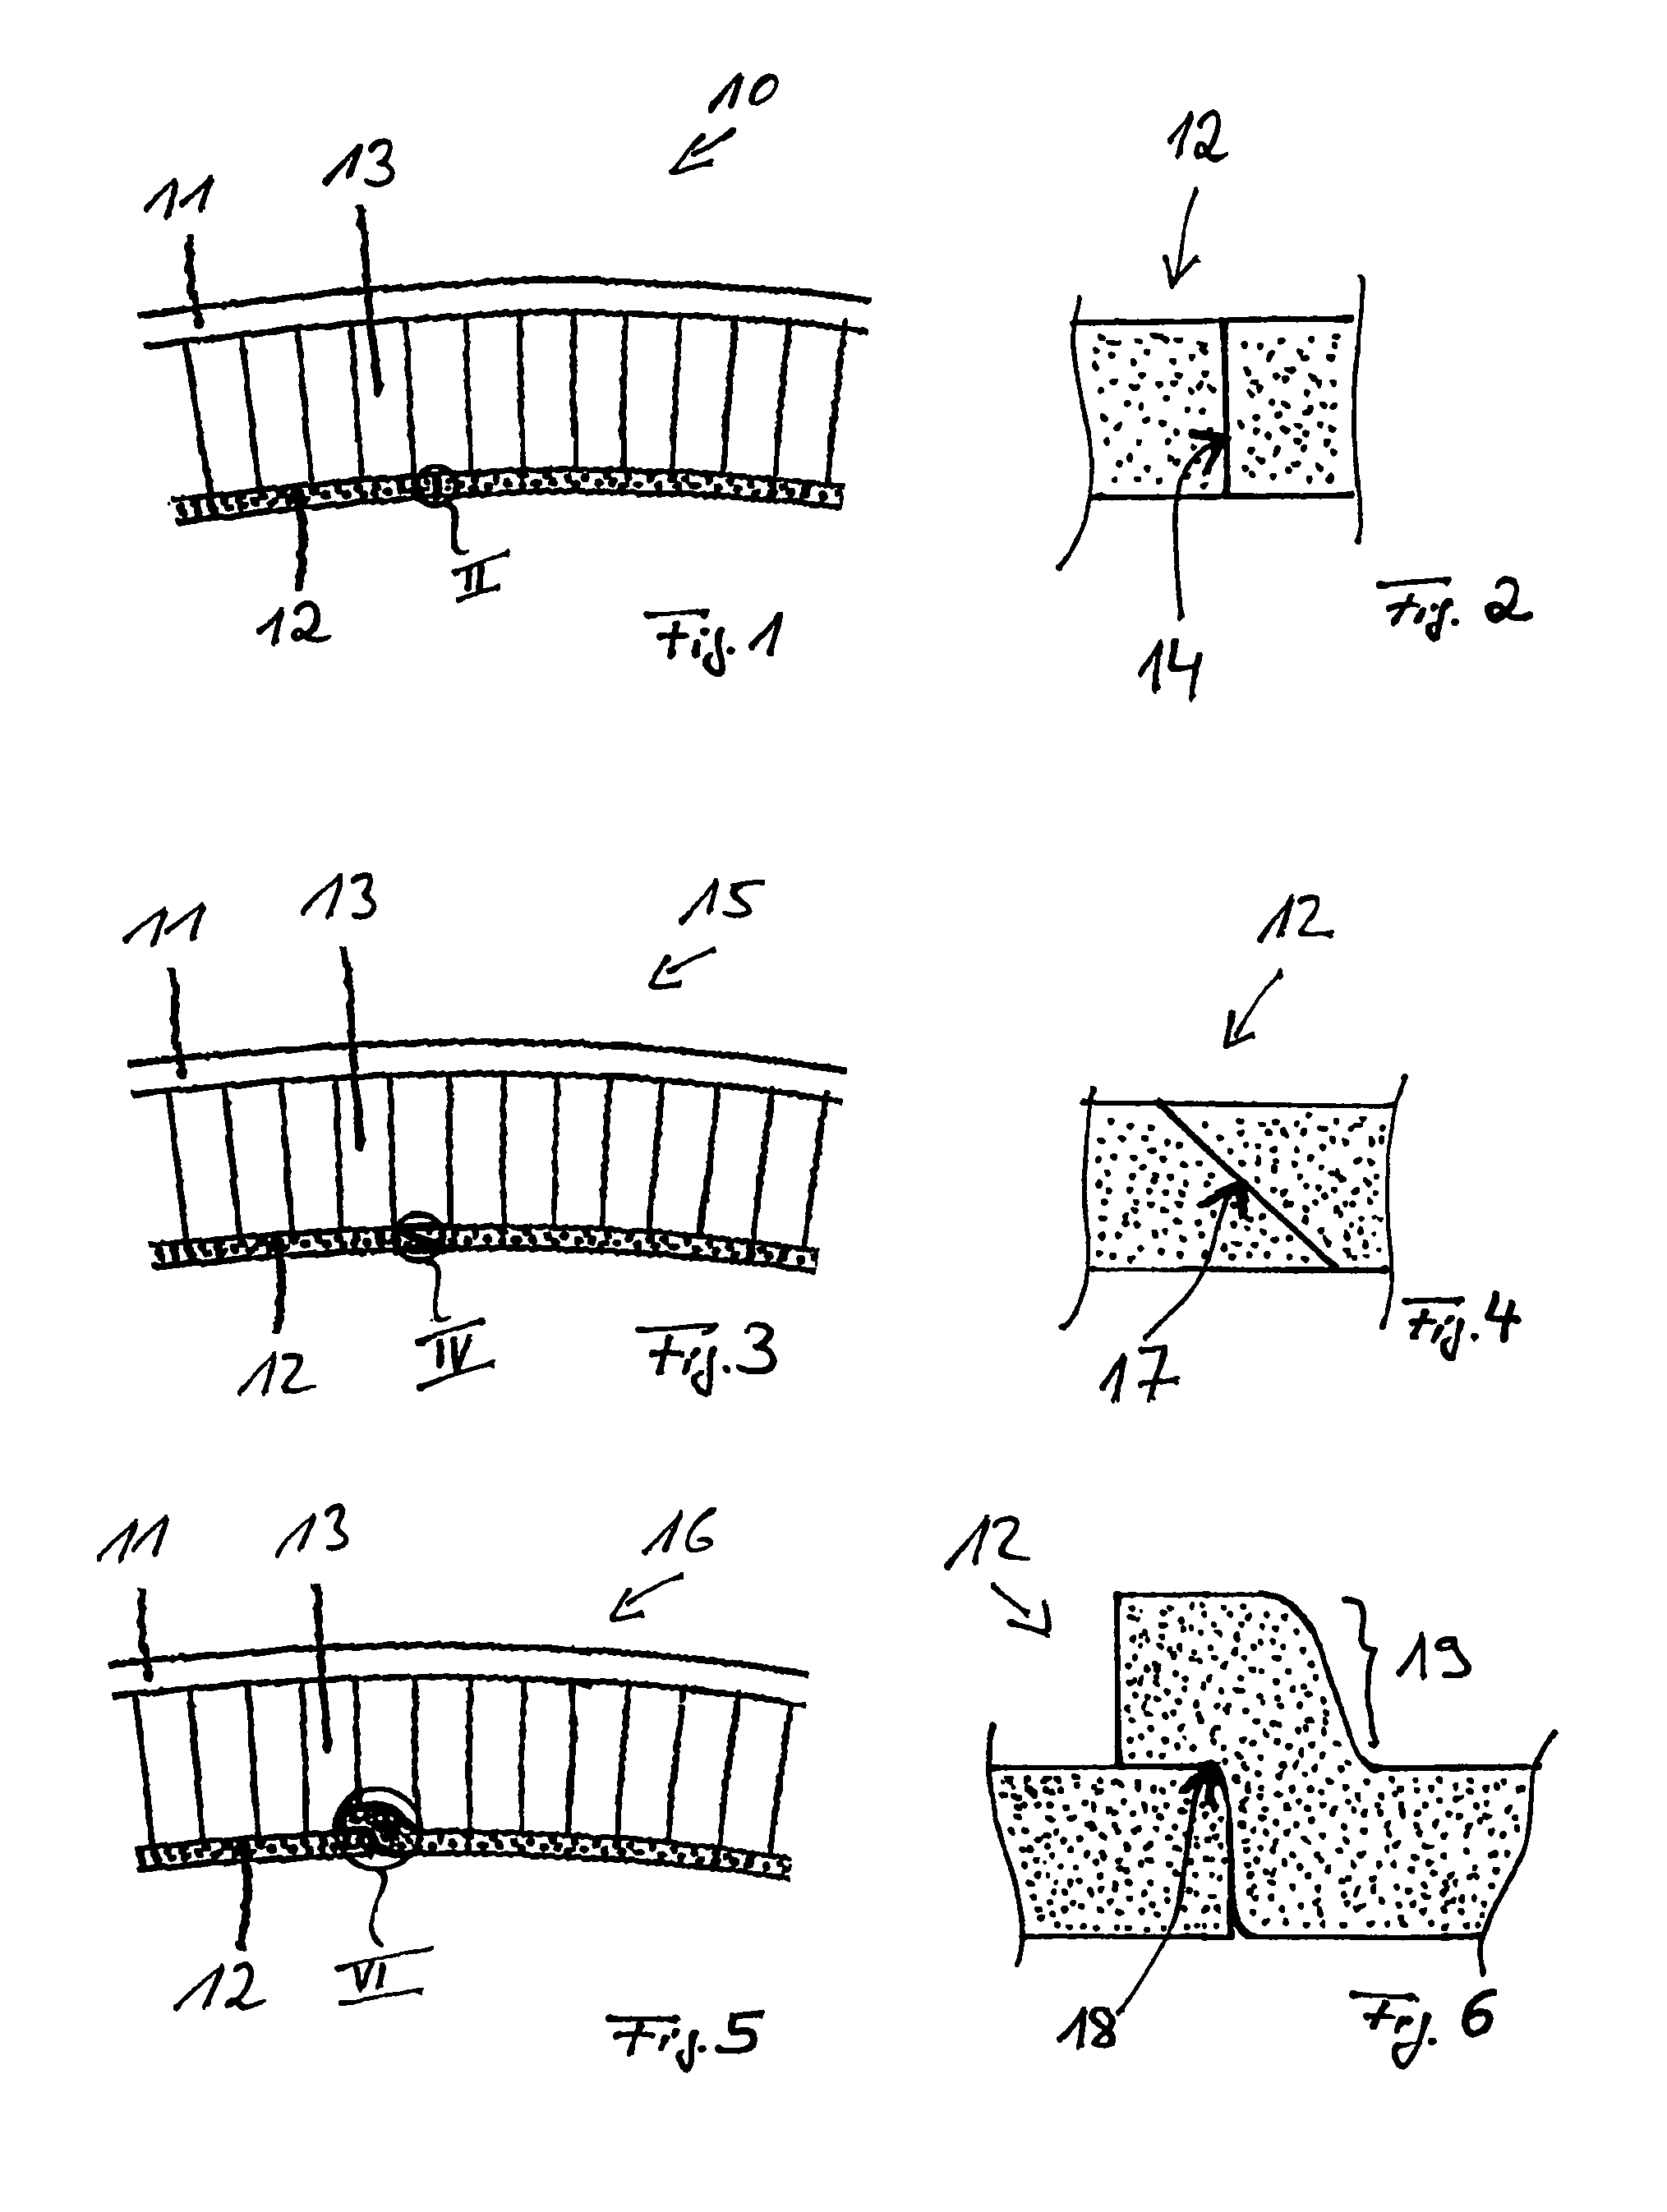 Ring structure of metal construction having a run-in lining